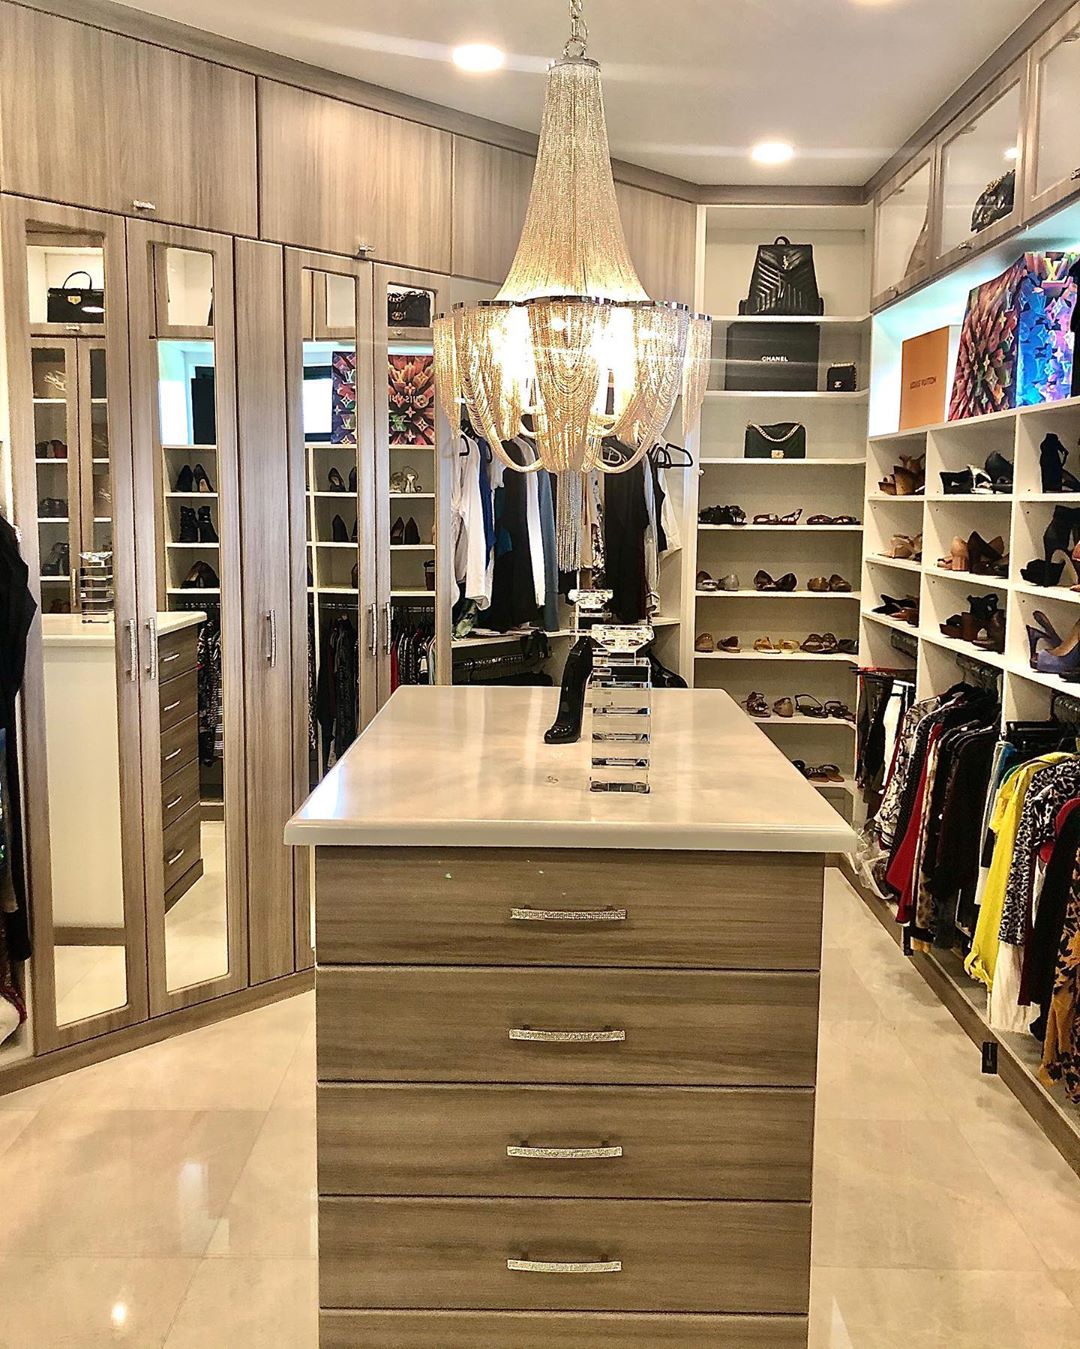 Closet with glossy tile floor. Photo by Instagram user @designedbyangelina